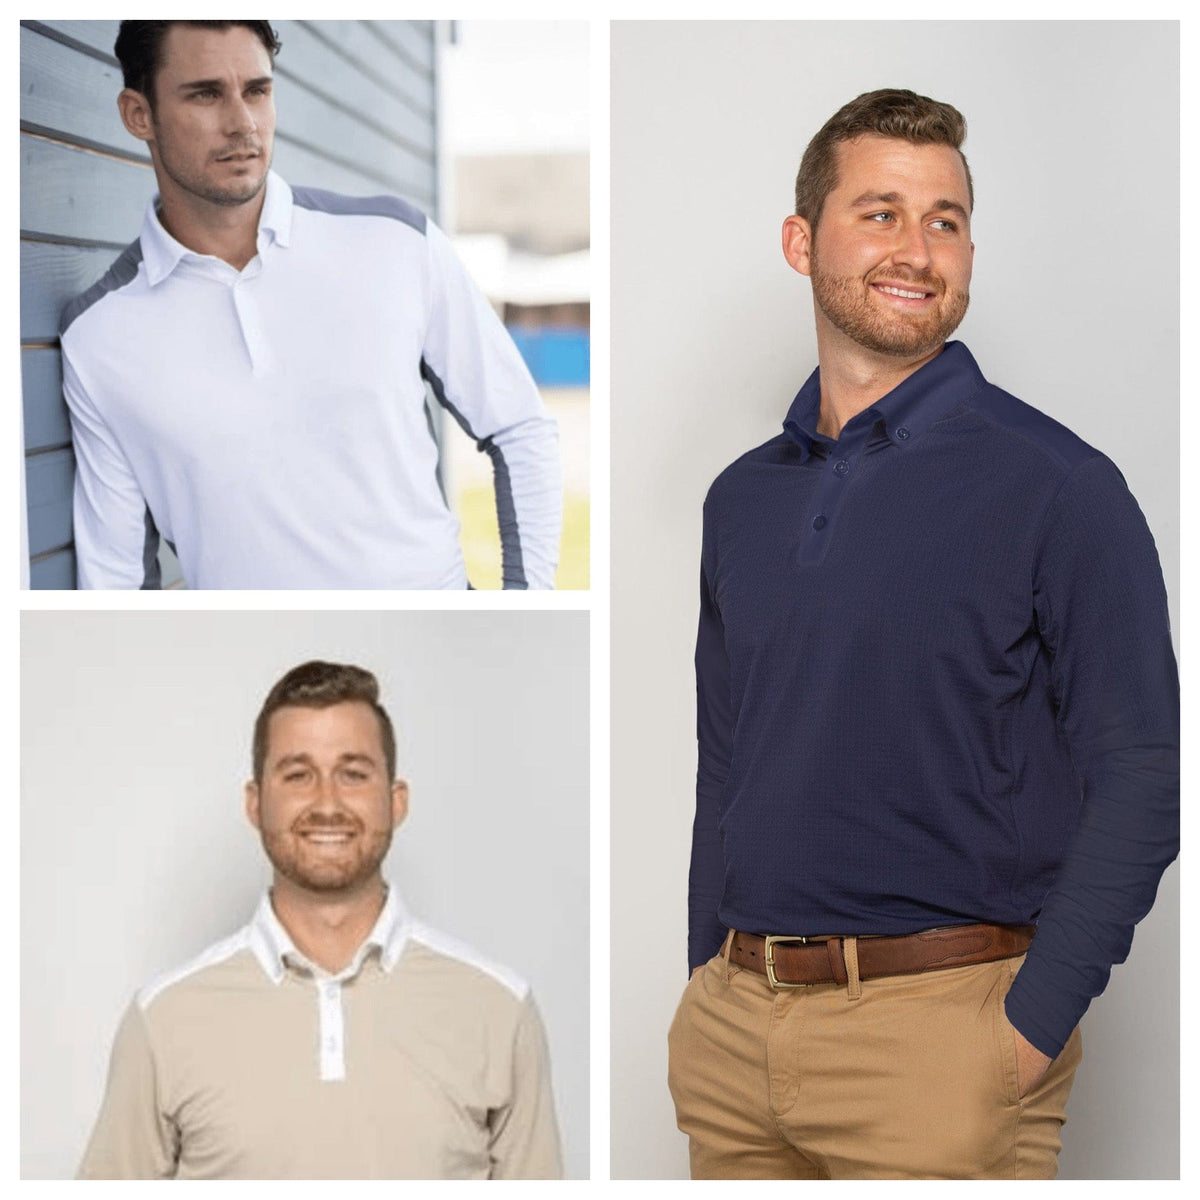 EIS Men's Shirts EIS- Men's Show Shirts (Long Sleeve) equestrian team apparel online tack store mobile tack store custom farm apparel custom show stable clothing equestrian lifestyle horse show clothing riding clothes horses equestrian tack store